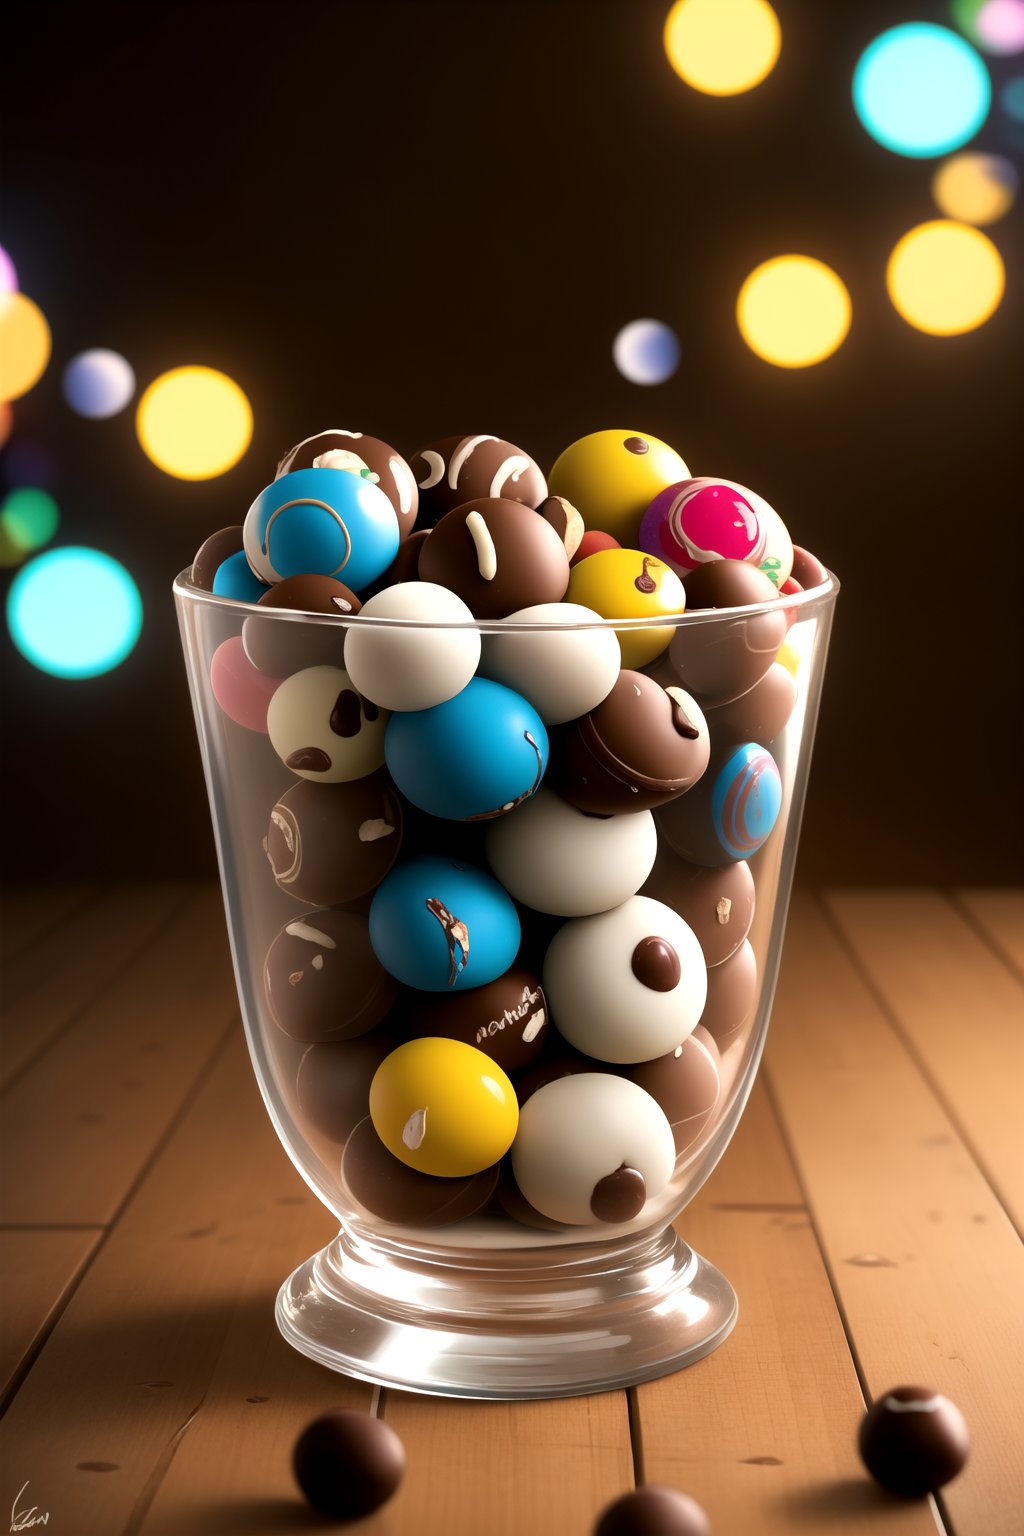 centered, photography, | multiple glass bowl, chocolate balls, candies, cookies, bread, almonds, peanuts, delicious, symetrical, realistic, | bokeh, depth of field, | gamer bar, gamer decoration, rgb lights